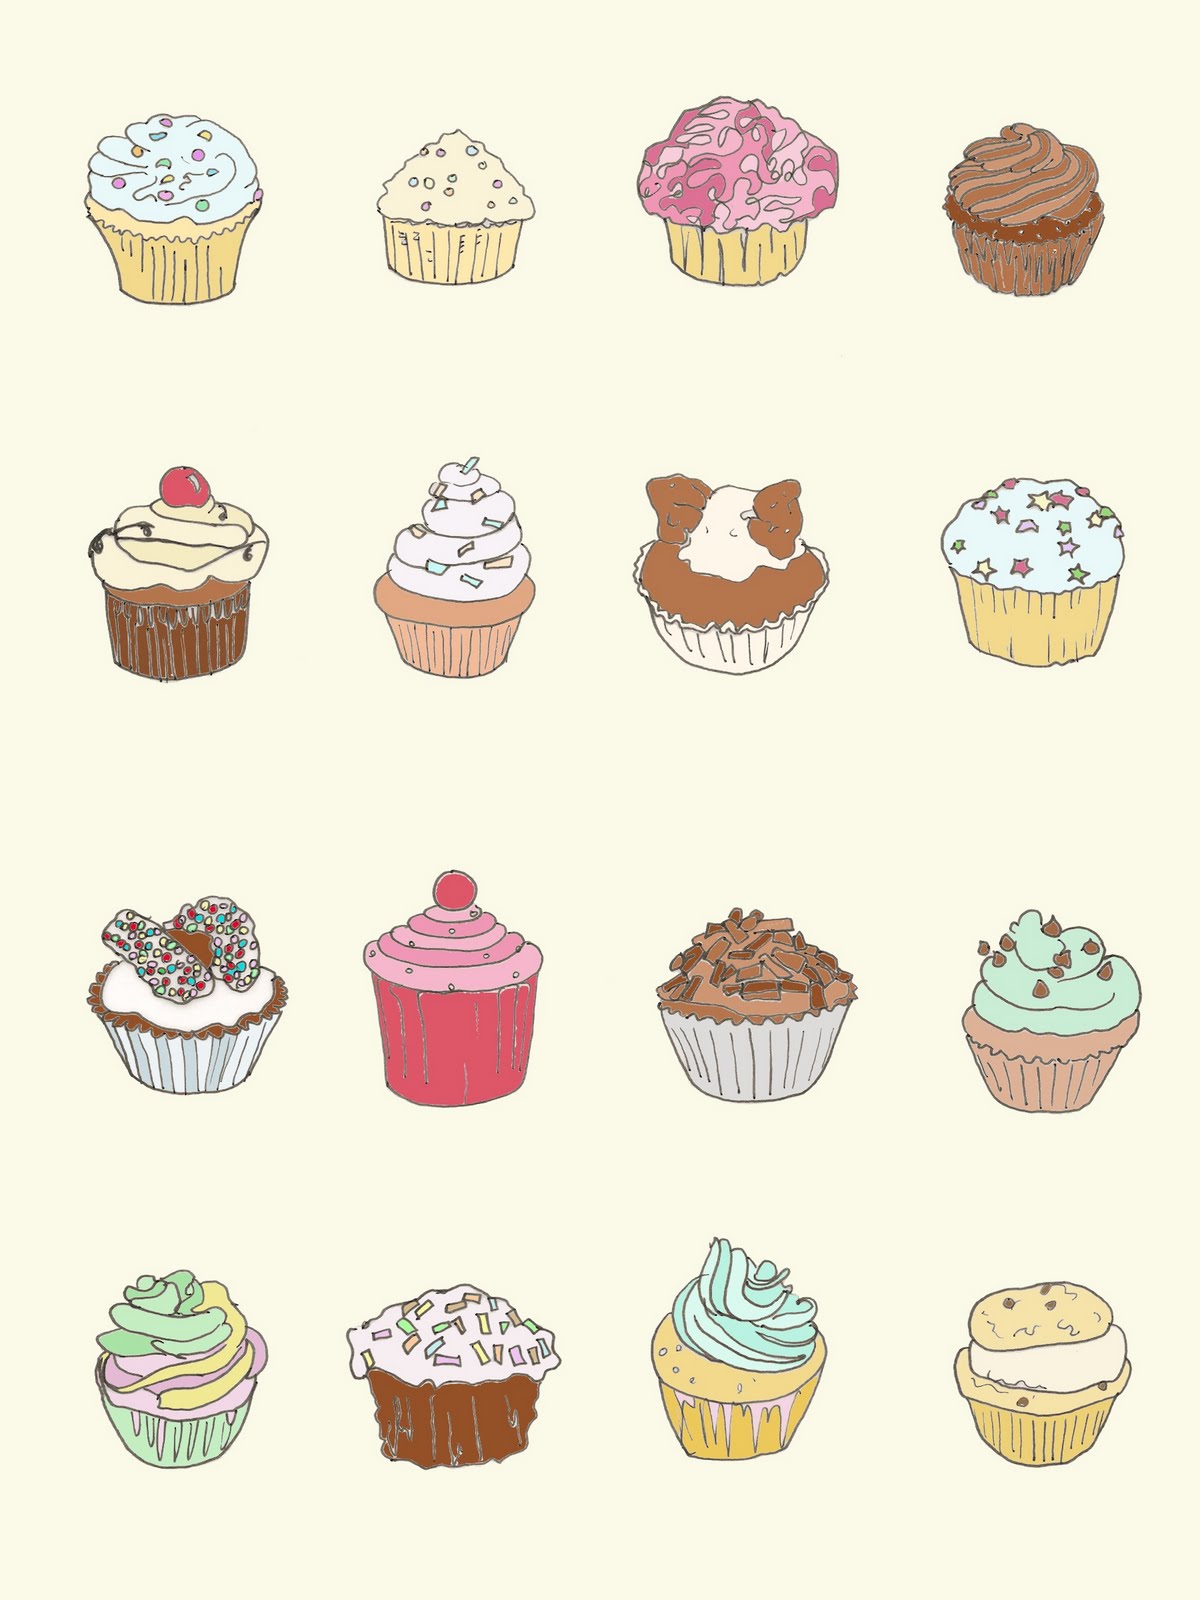 Colored pencils cupcake illustration by ViksyCreative on DeviantArt